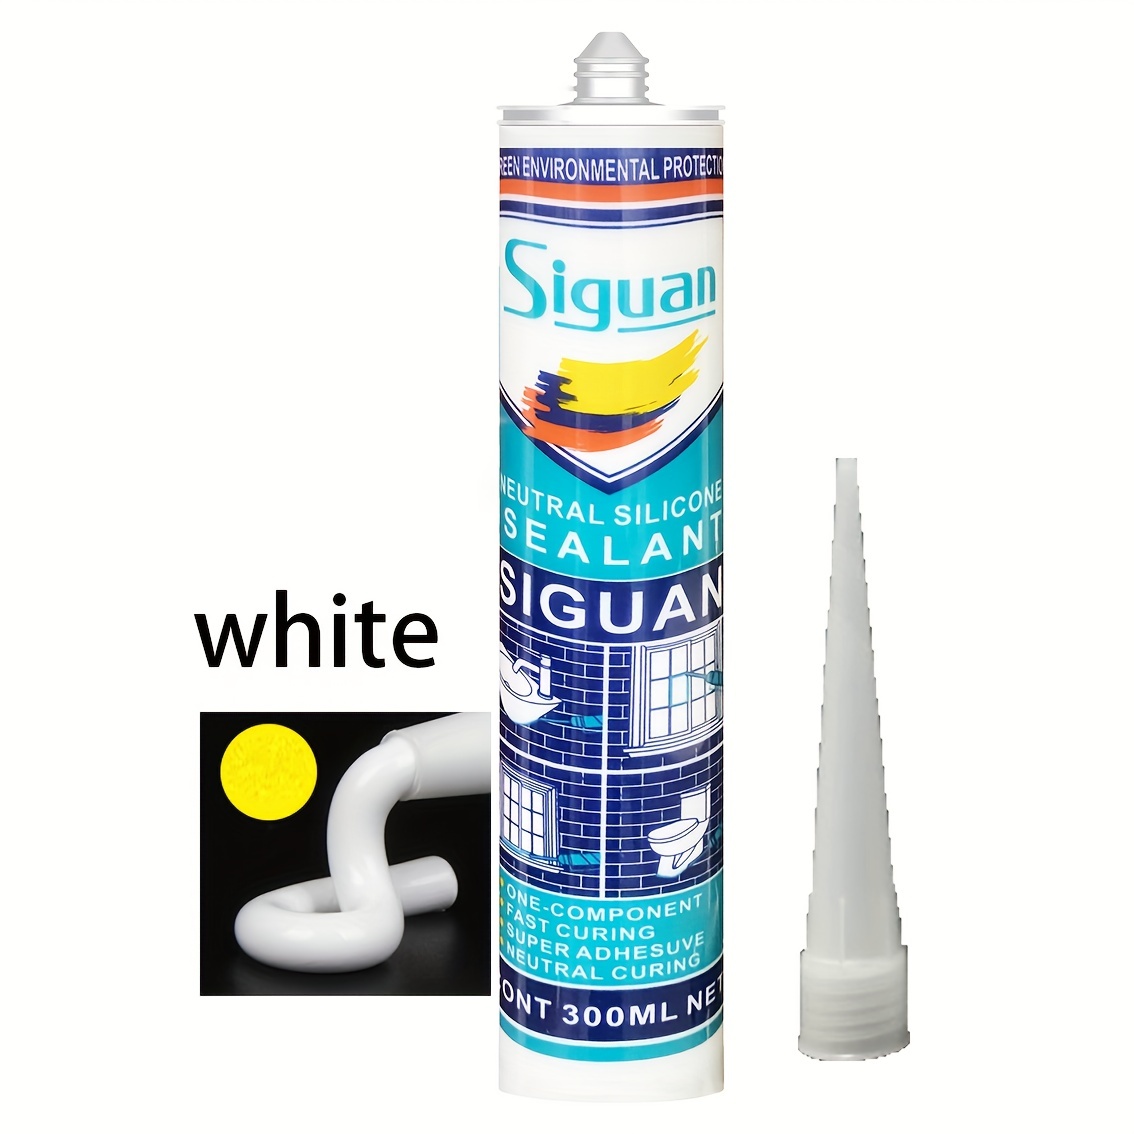 WOSLXM Waterproof Anti-Leakage Agent, Waterproof Glue, Jaysung Invisible  Waterproof Agent, Waterproof Sealant Agent Transparent Glue for Shower